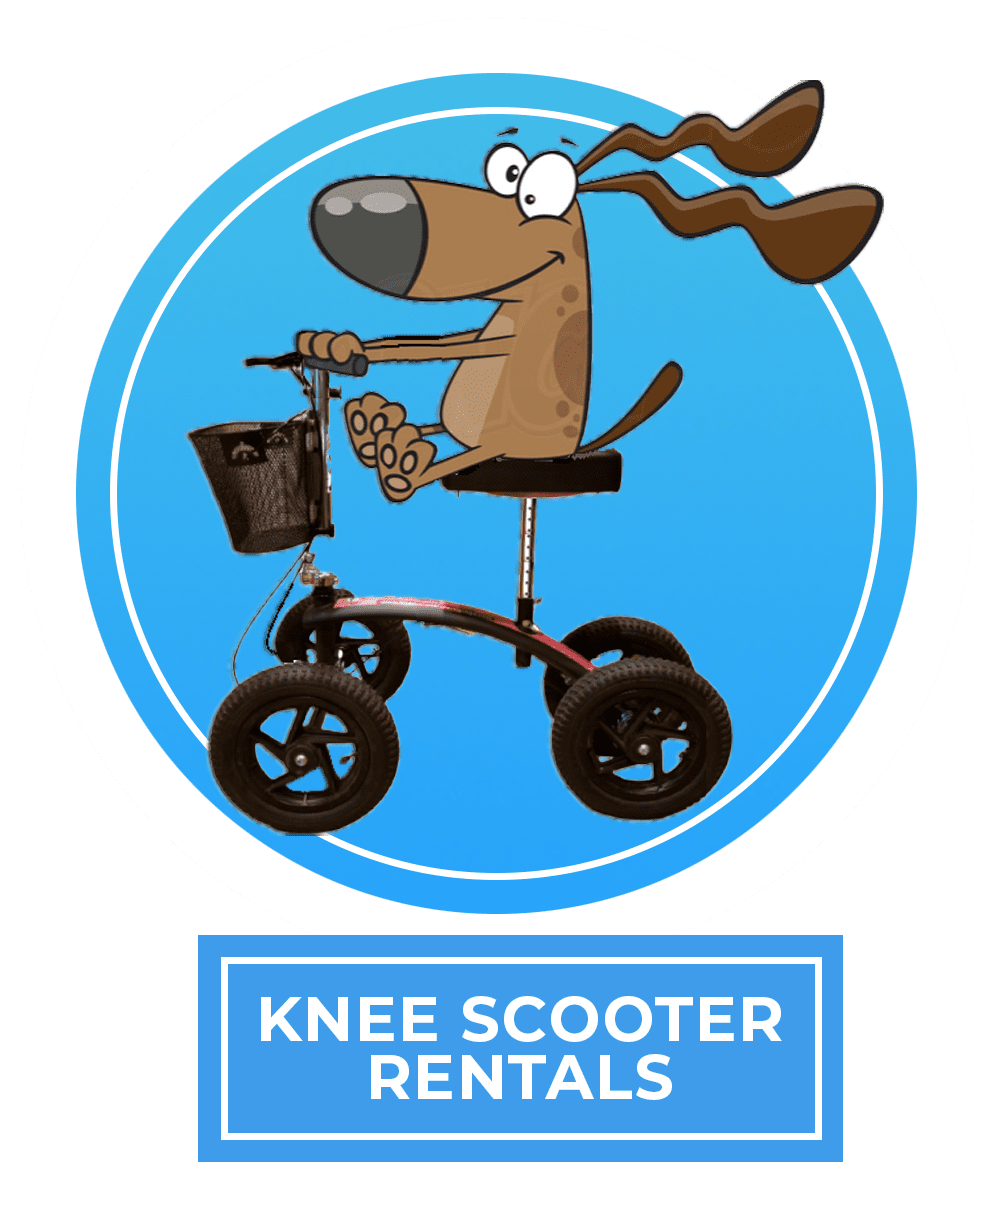 Knee Scooter Rentals, Knee Scooter USA - Leg Scooter Rentals - Dog on scooter, Knee Scooter Rentals, Knee Scooter Rental, knee scooter rental near me, knee scooter near me, knee walker rental, medical knee scooter rental, broken foot scooter rental, leg scooter rental near me, foot scooter rental, broken leg scooter rental, best knee scooter usa, best knee scooter usa near me,